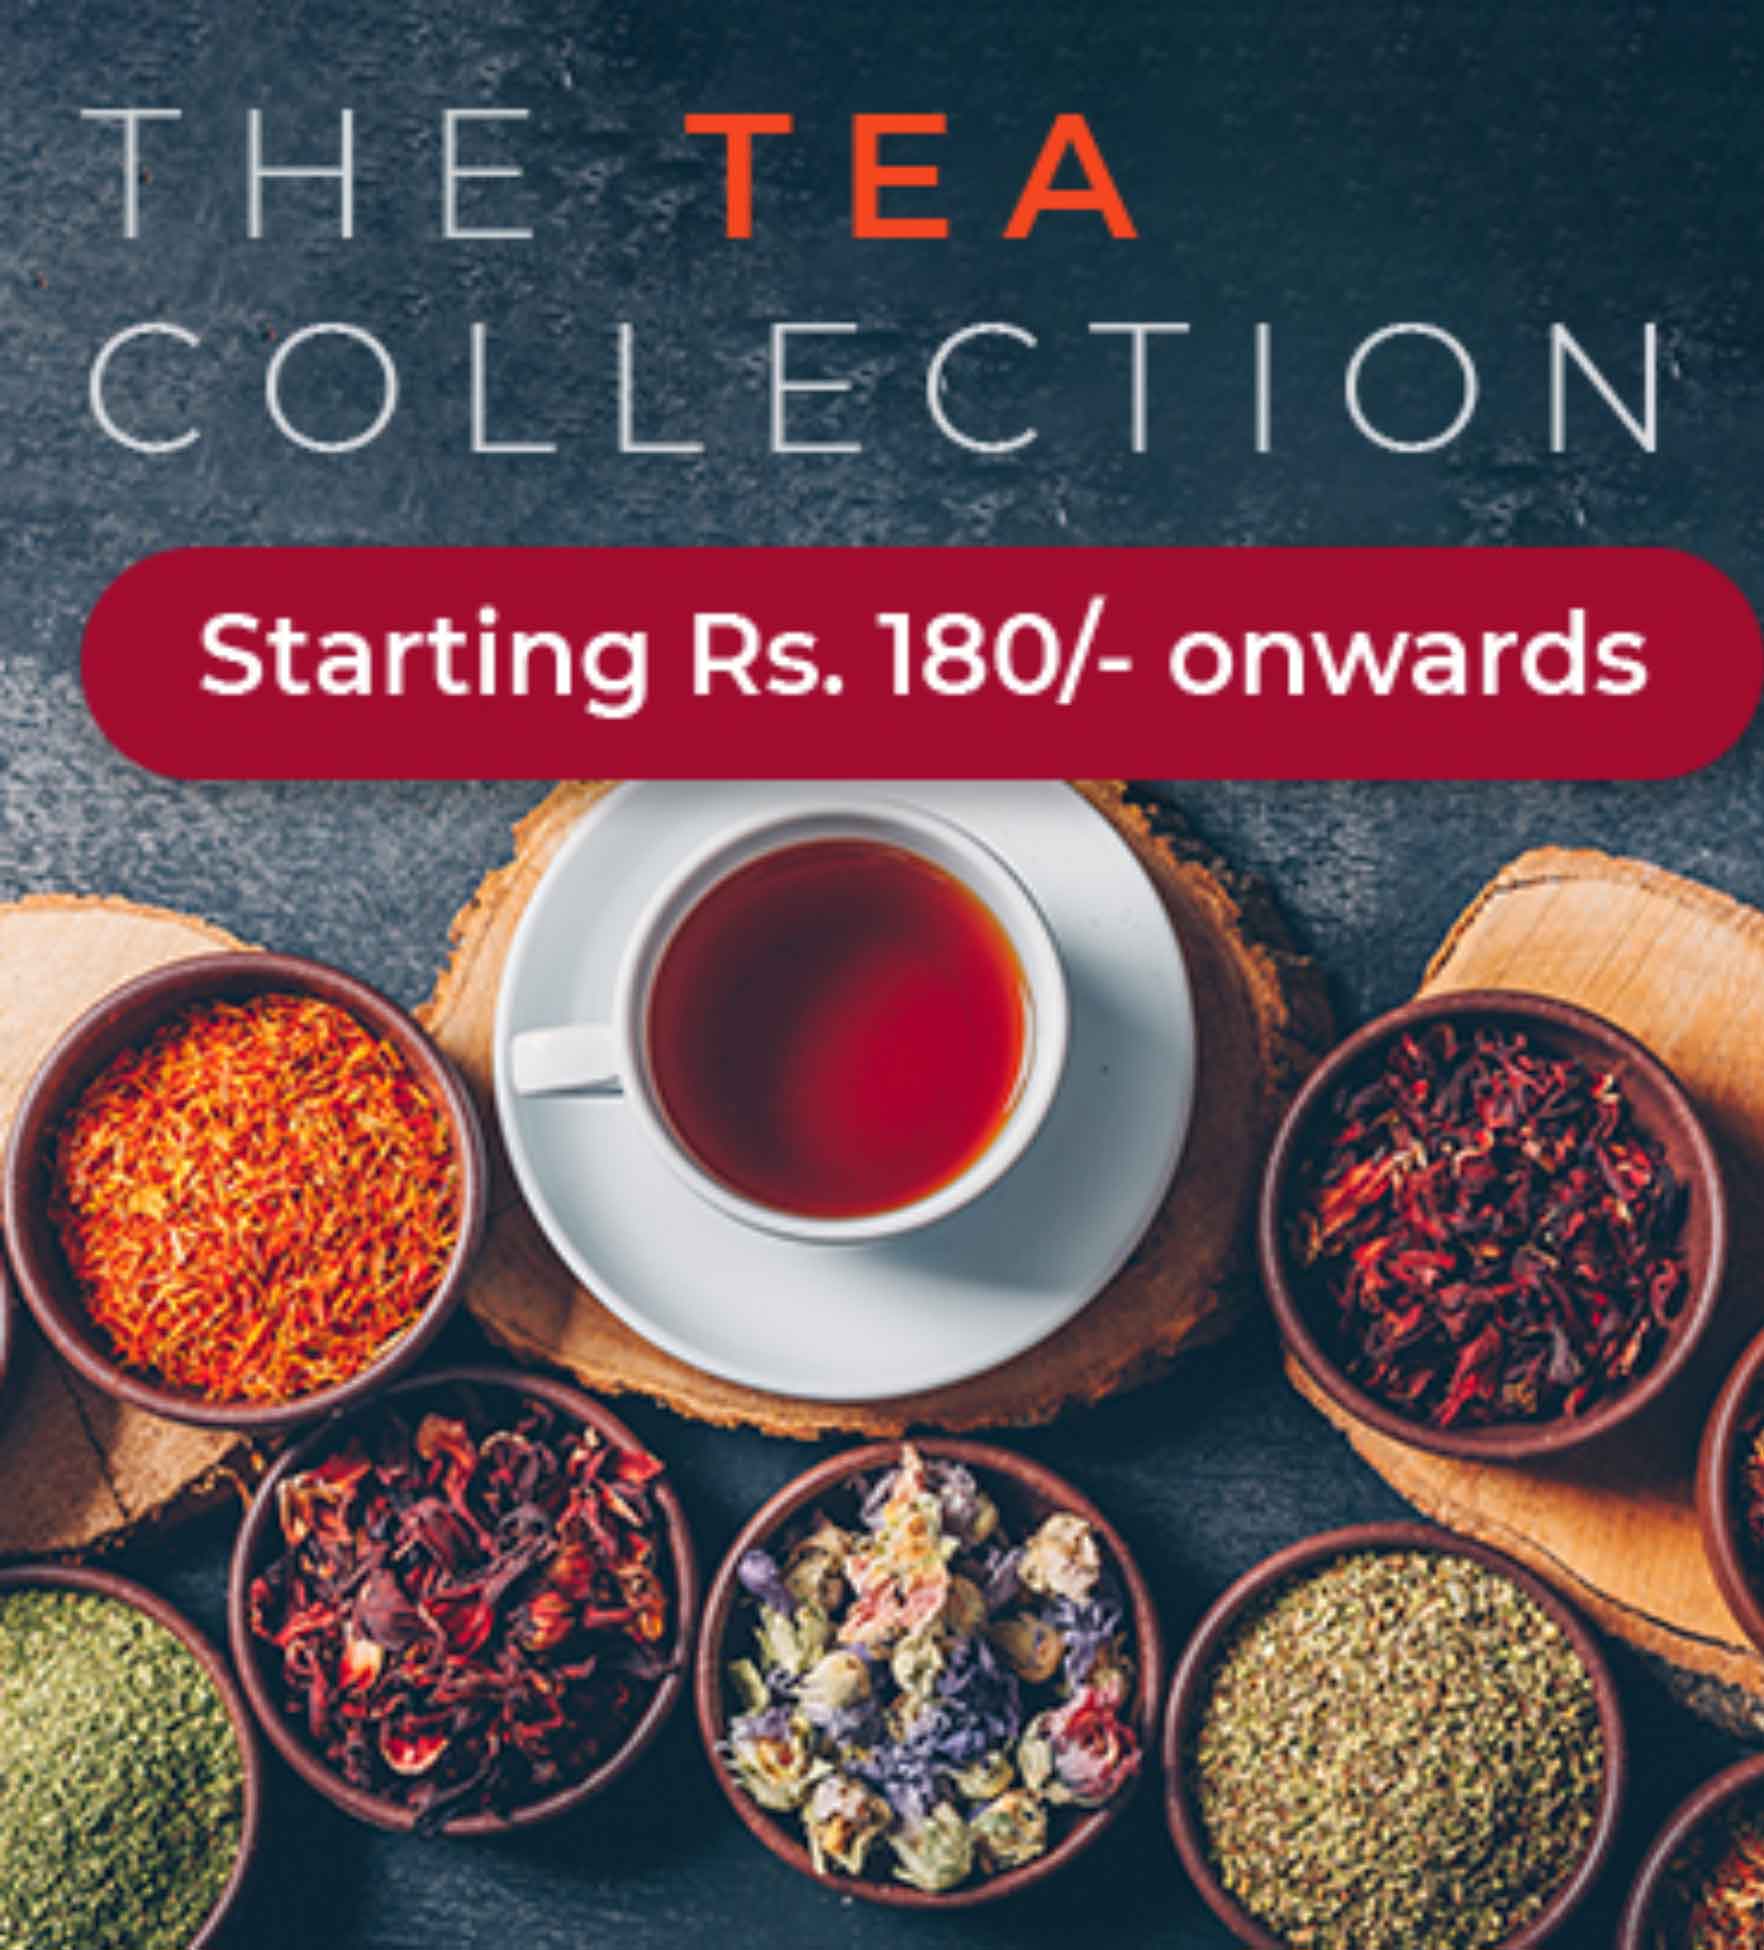 Sip! Sip! Sip! An awesome tea collection from across the country